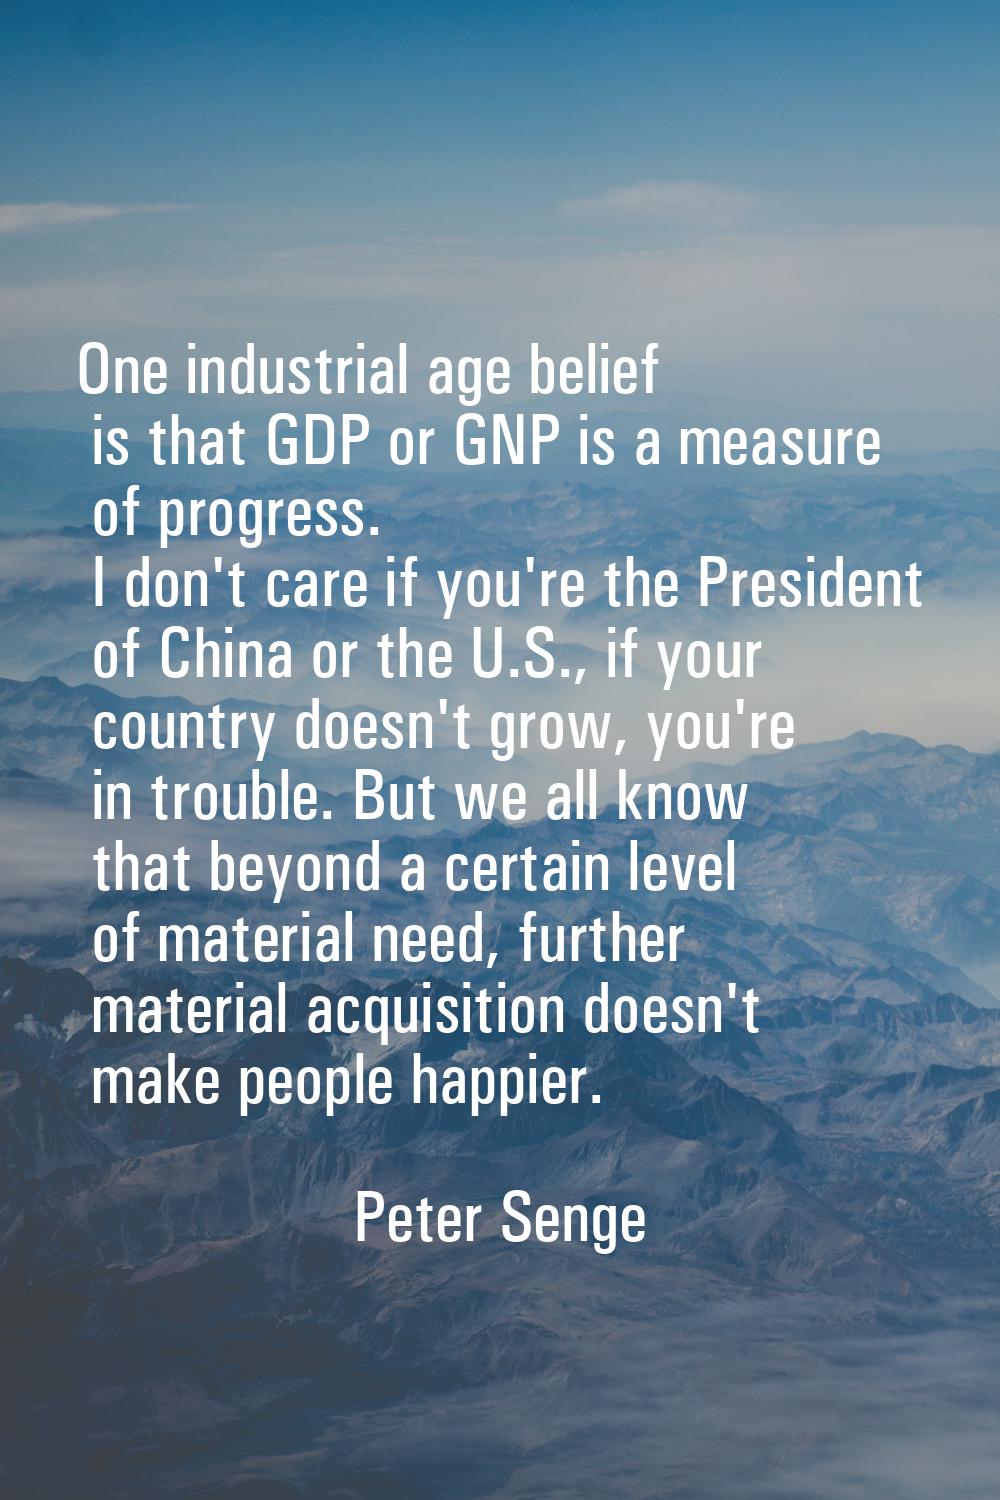 One industrial age belief is that GDP or GNP is a measure of progress. I don't care if you're the P